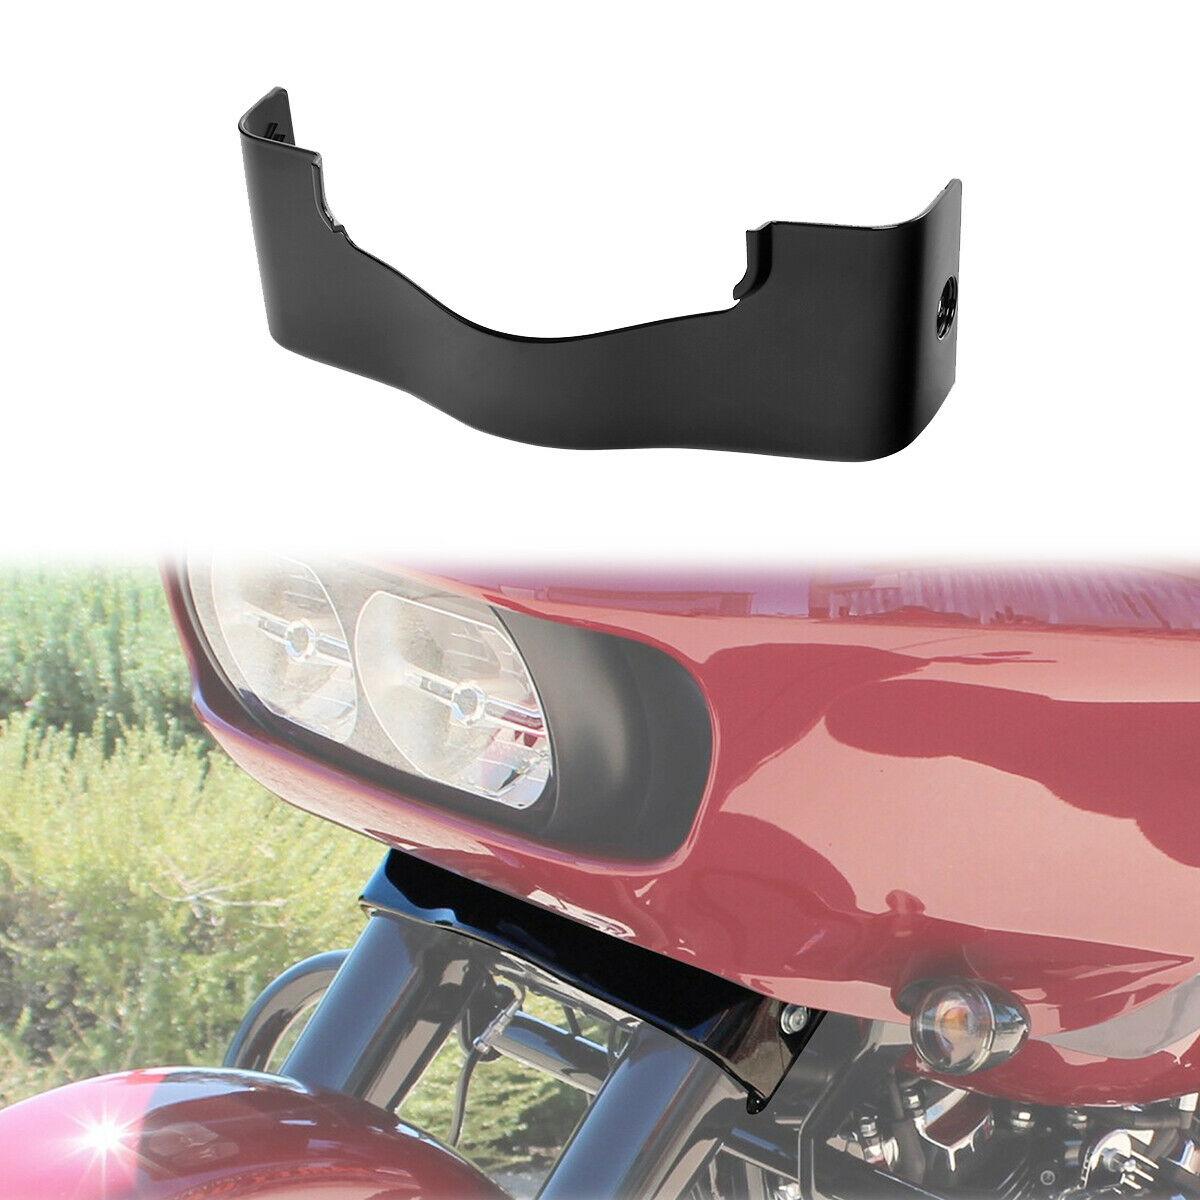 ABS Black Outer Fairing Trim Skirt Fit For Harley Davidson Road Glide 15-22 2021 - Moto Life Products